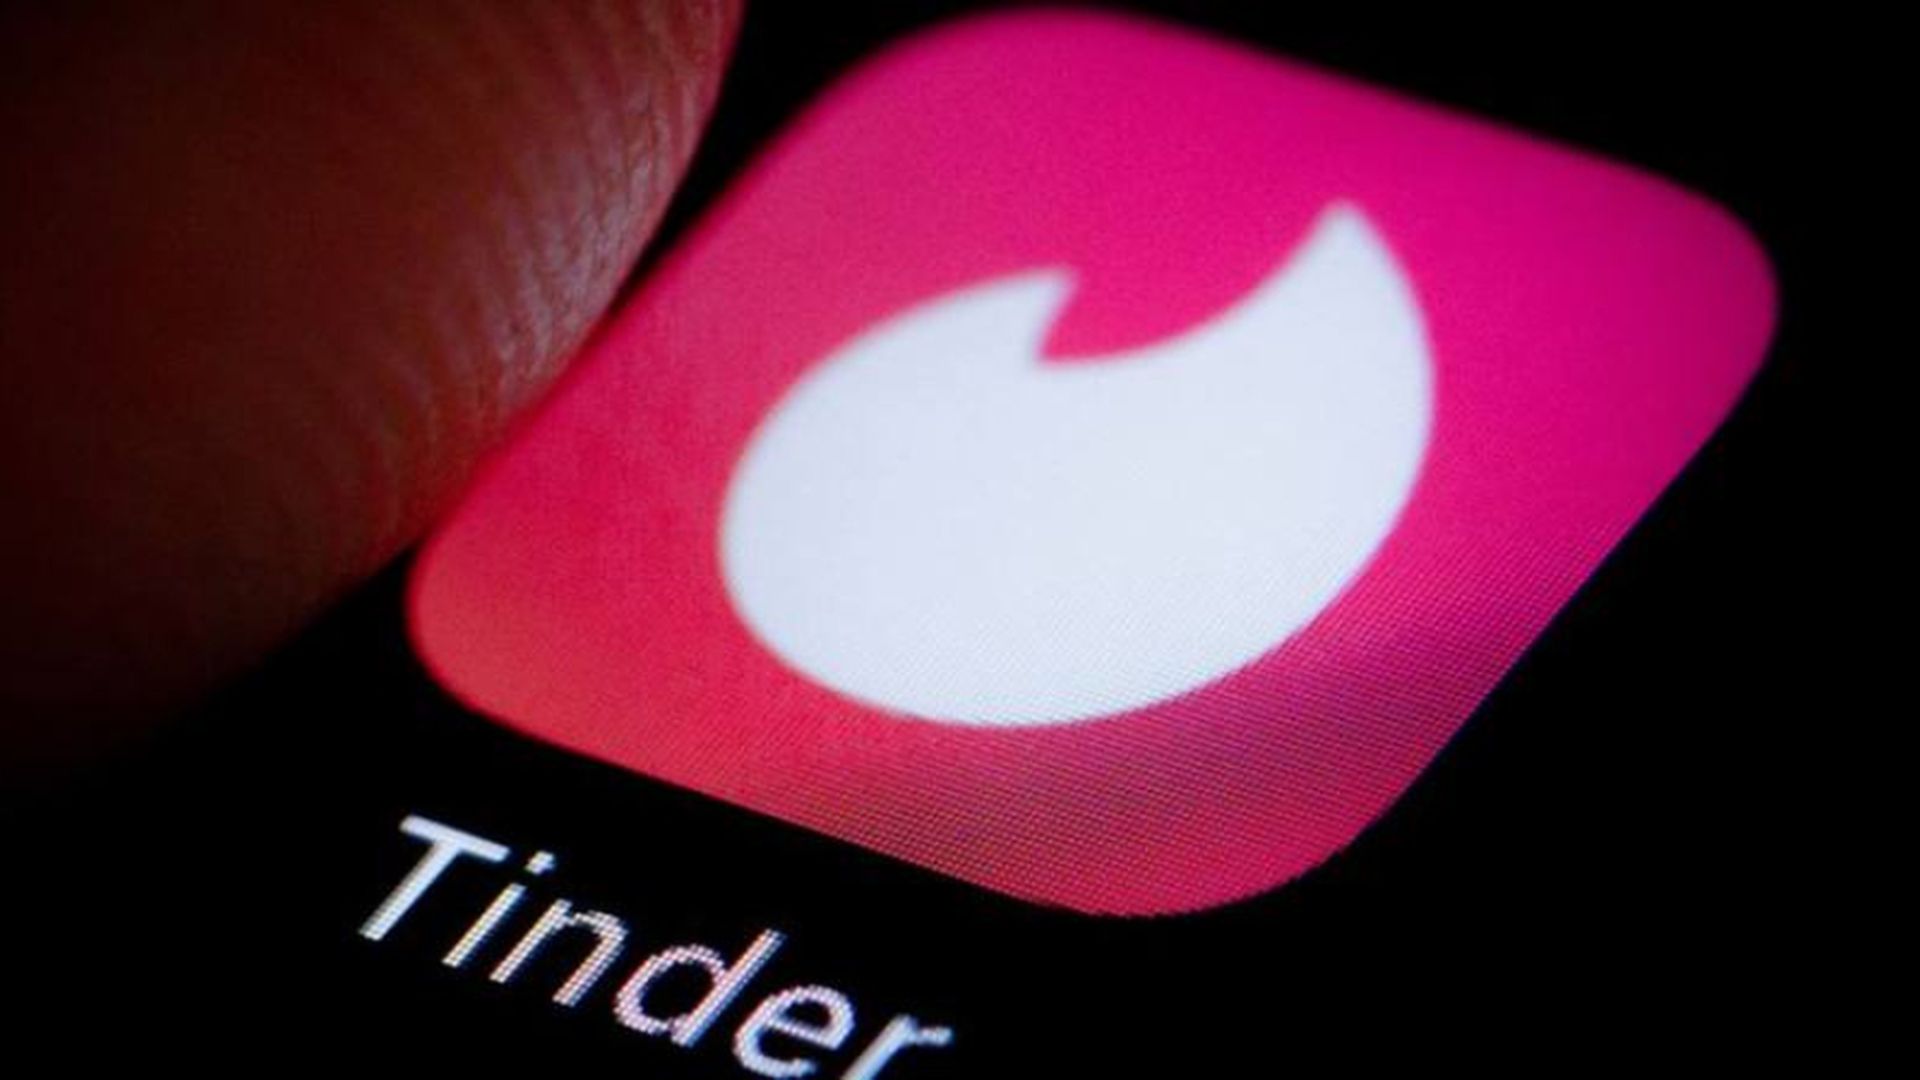 In this article, we are going to be covering what are Top Picks on Tinder, so you can understand how they work and get back to swiping.